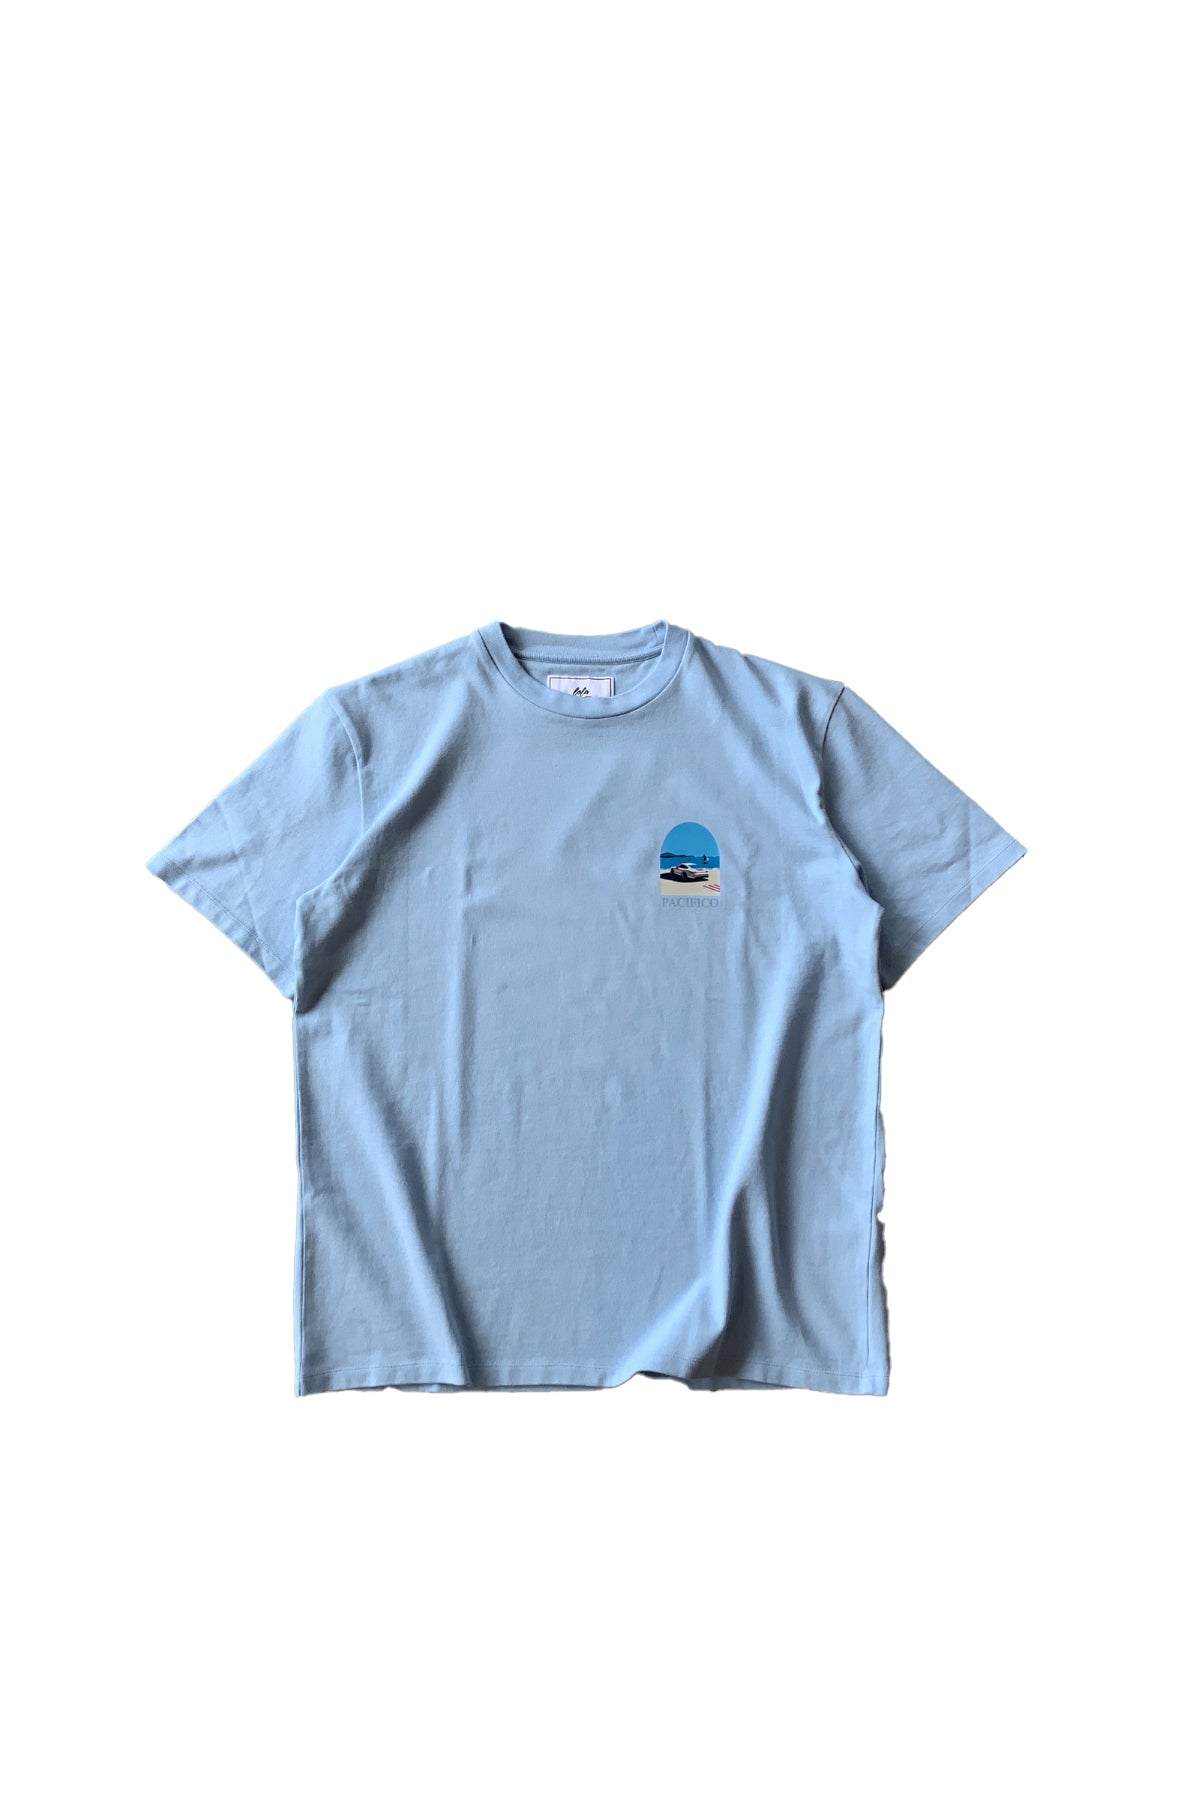 The Made in France Tee Pacifico, icy blue